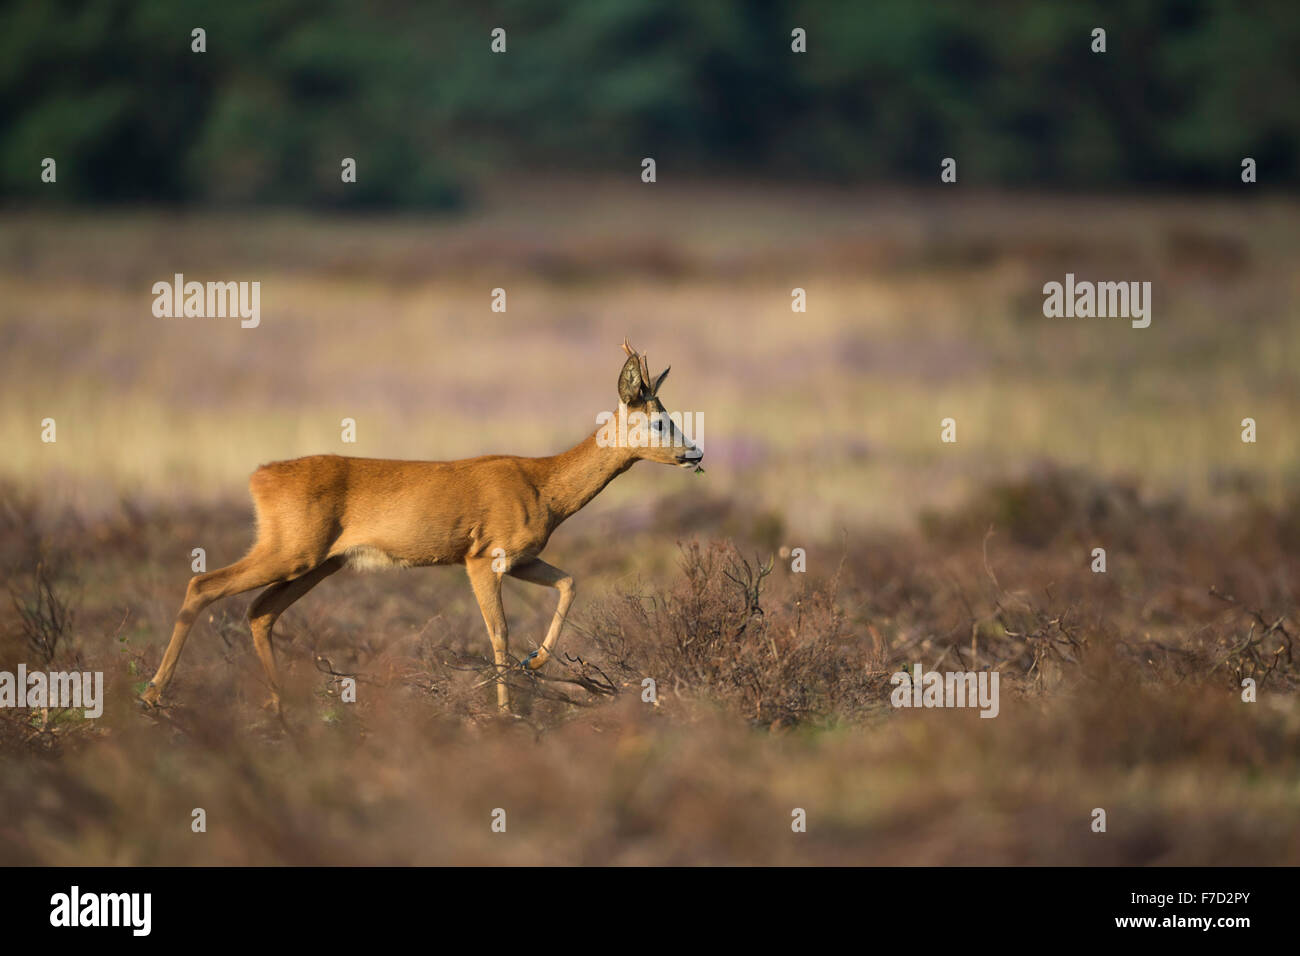 Roe deer / Buck / Reh ( Capreolus capreolus ) walks calmly over open dry grassland, with herbs in its mouth. Stock Photo